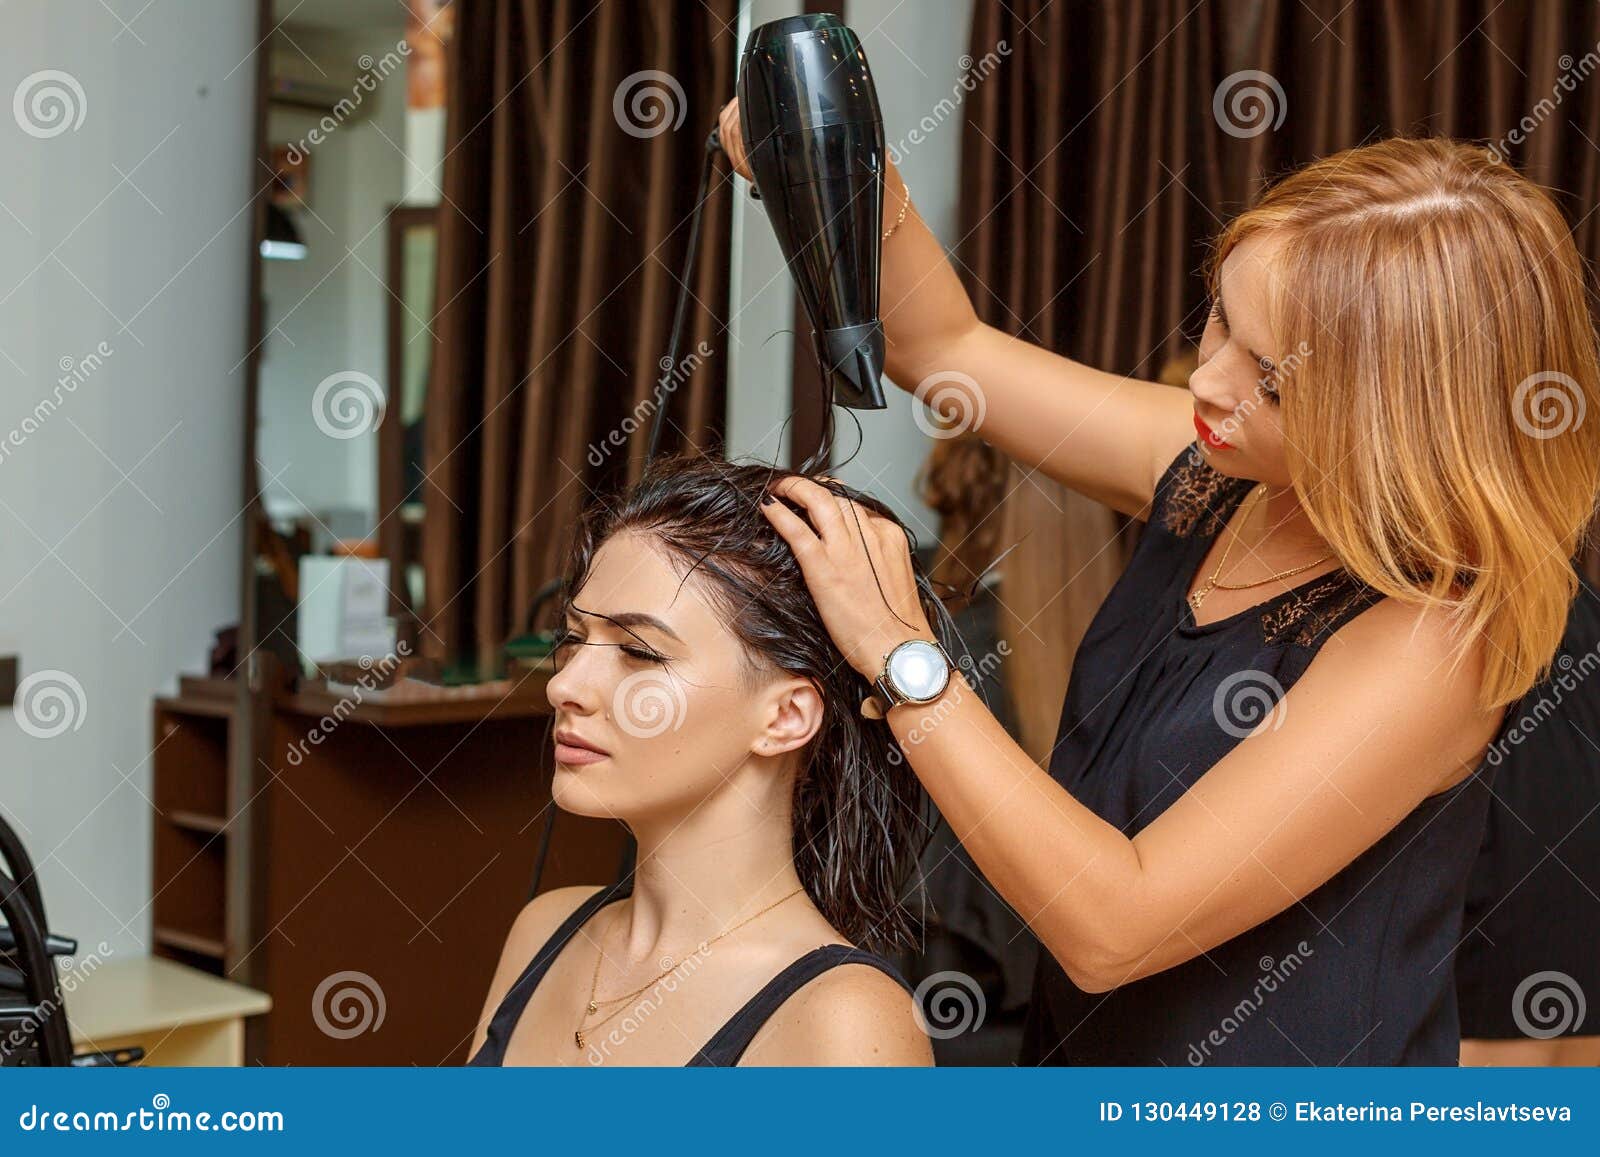 Professional Hairdresser with a Client in the Salon Stock Photo - Image